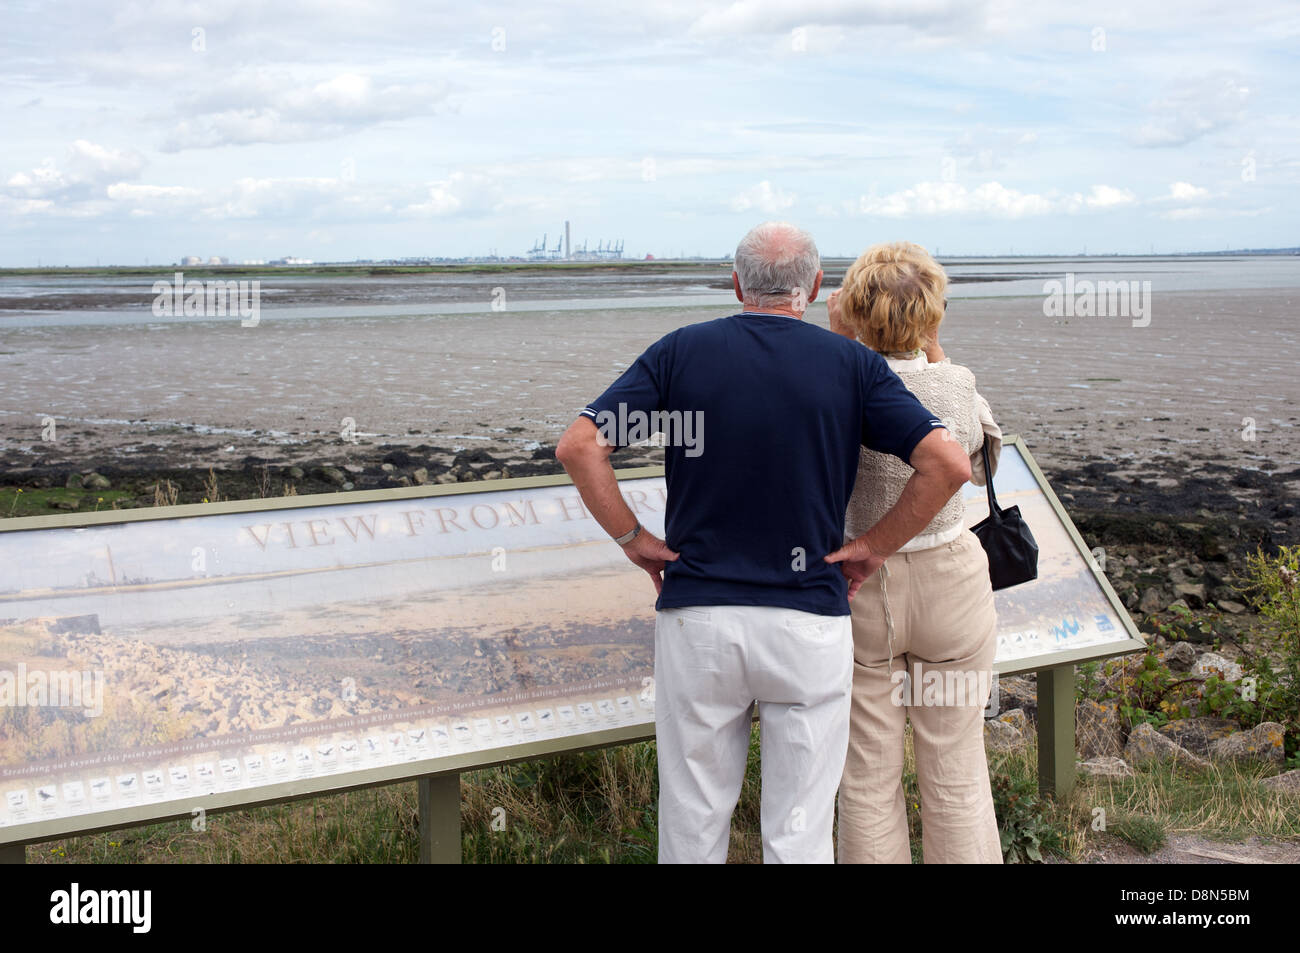 Visitors at the Medway Estuary viewing point in Kent, UK. Stock Photo